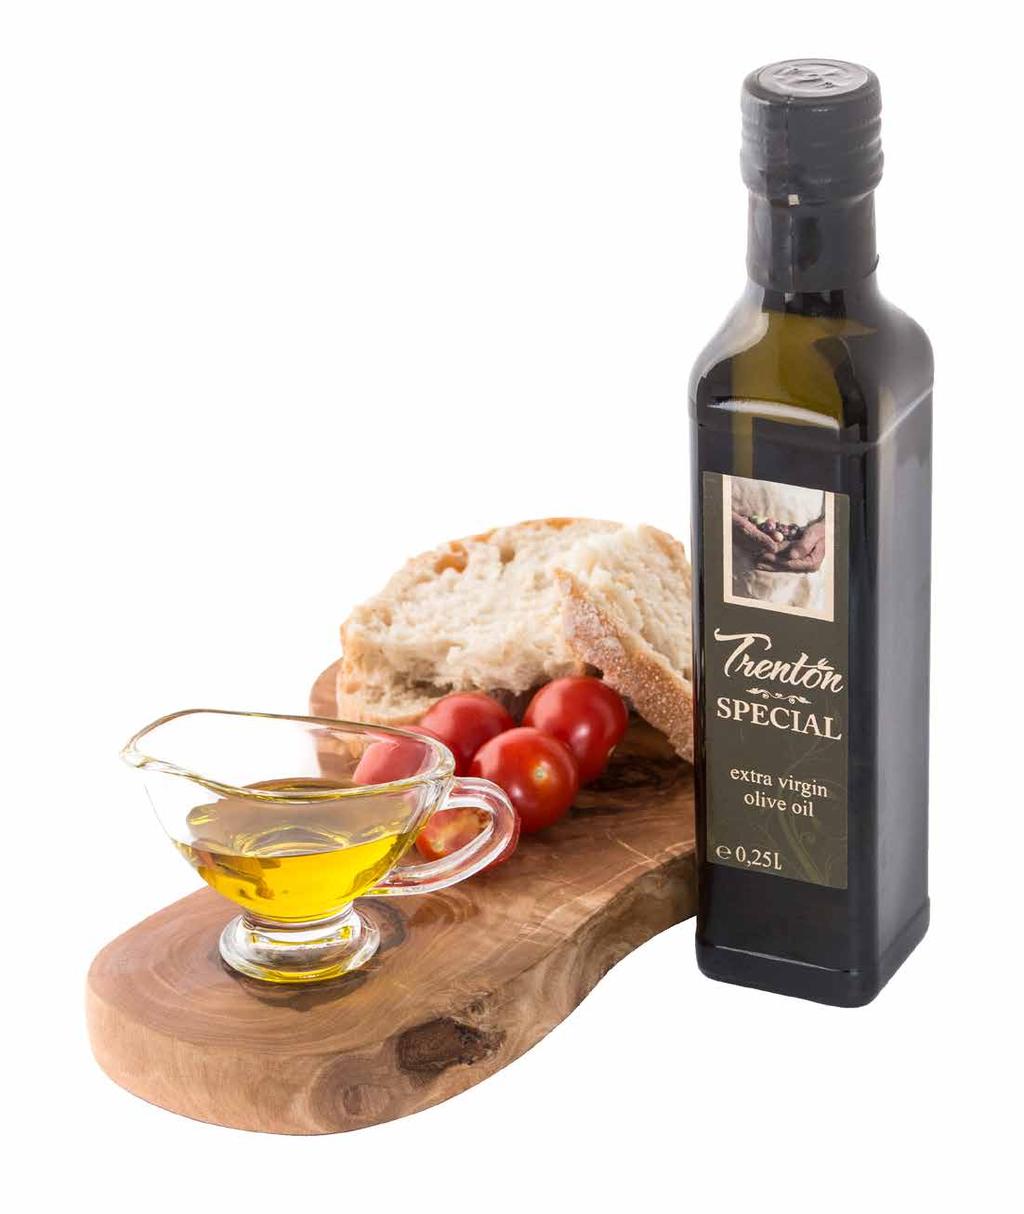 SPECIAL extra virgin olive oil is produced from local, hand-picked Dalmatian olives,